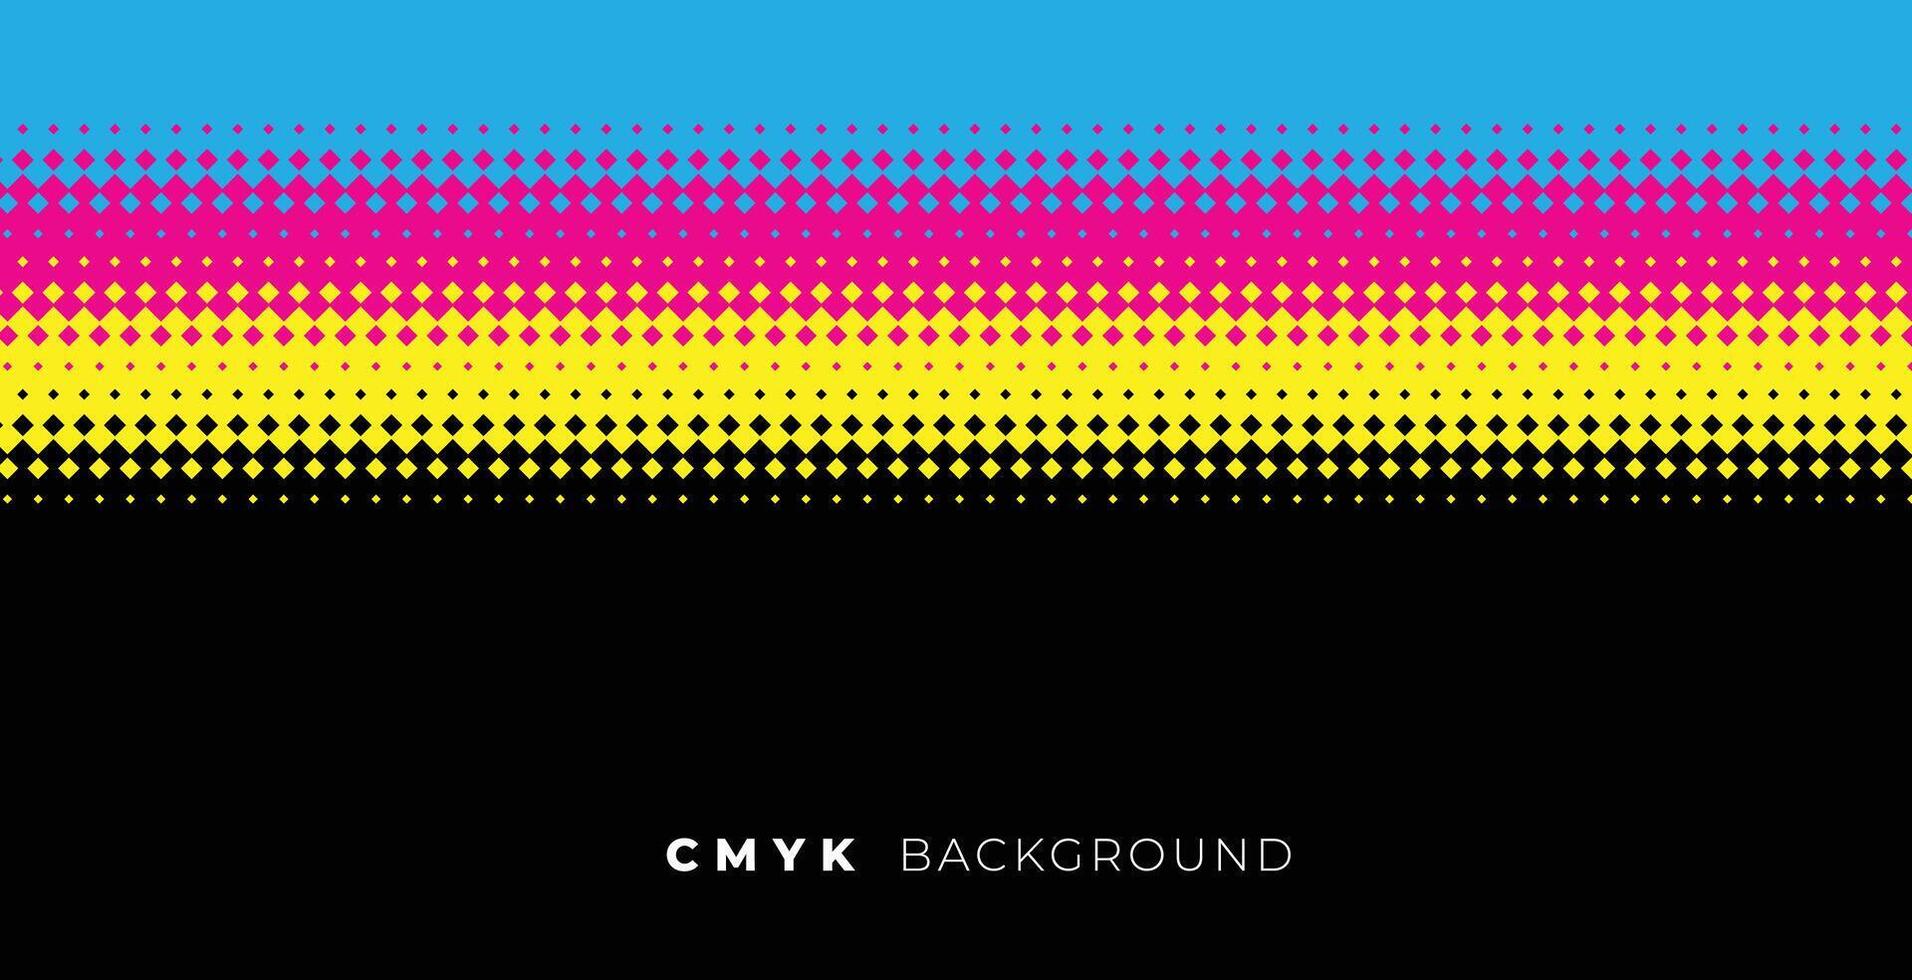 halftone background with cmyk colors vector